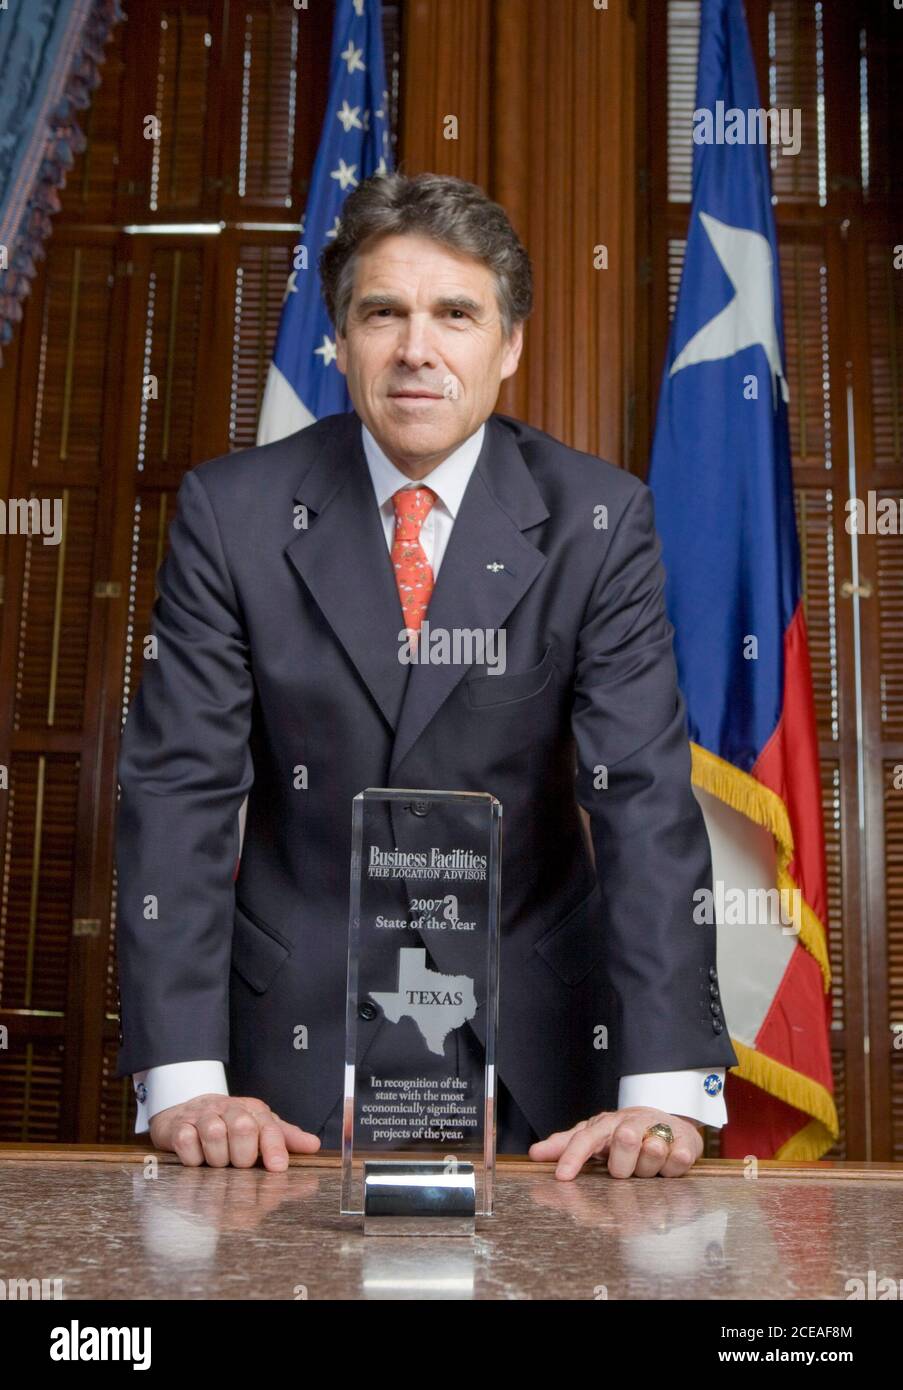 Austin, TX March 26, 2008: Texas Governor Rick Perry poses in his office with an economic development award given to the state by Business Facilities Magazine, a trade publication. Texas has mostly weathered the business slowdown affecting the rest of the U.S. economy in 2008.  ©Bob Daemmrich Stock Photo